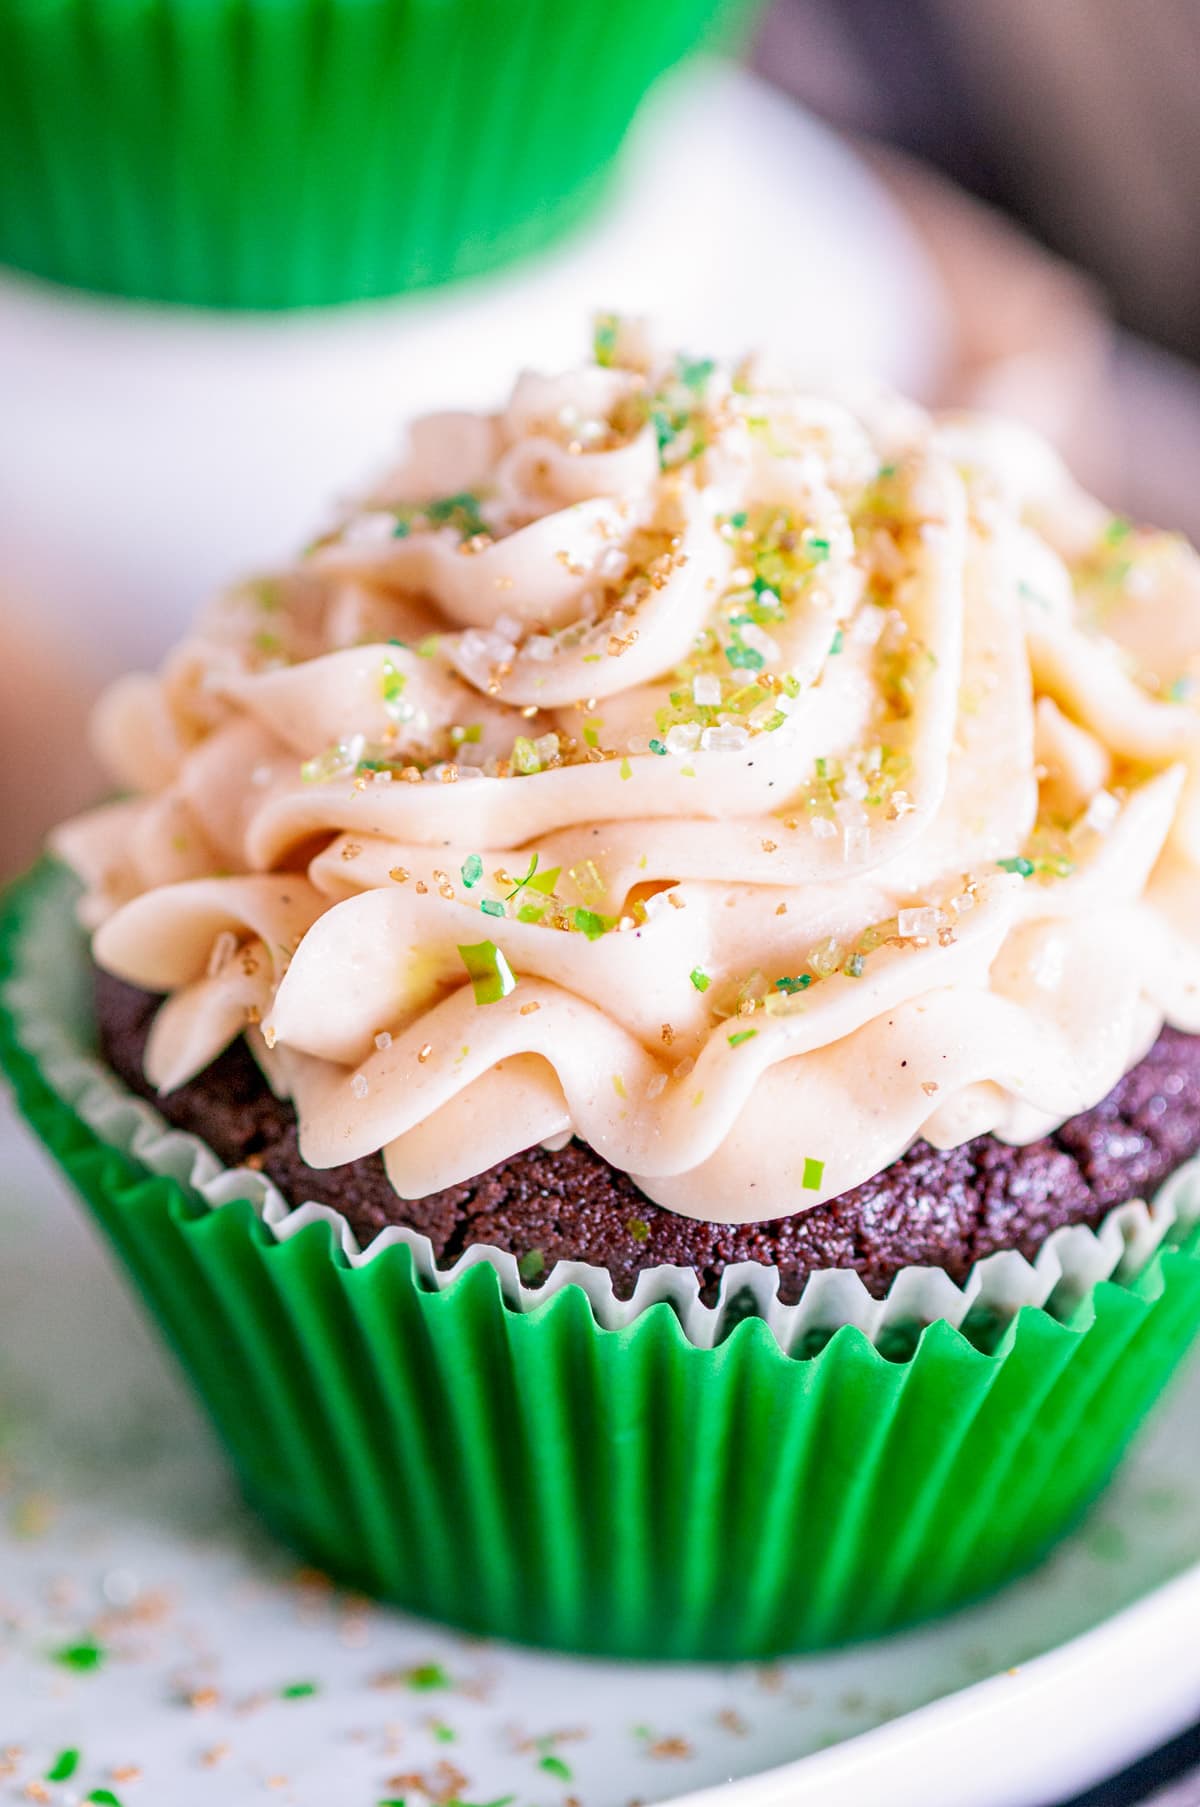 Guinness Chocolate Cupcakes with Baileys Buttercream Frosting in green liner topped with sanding sugar on white plate